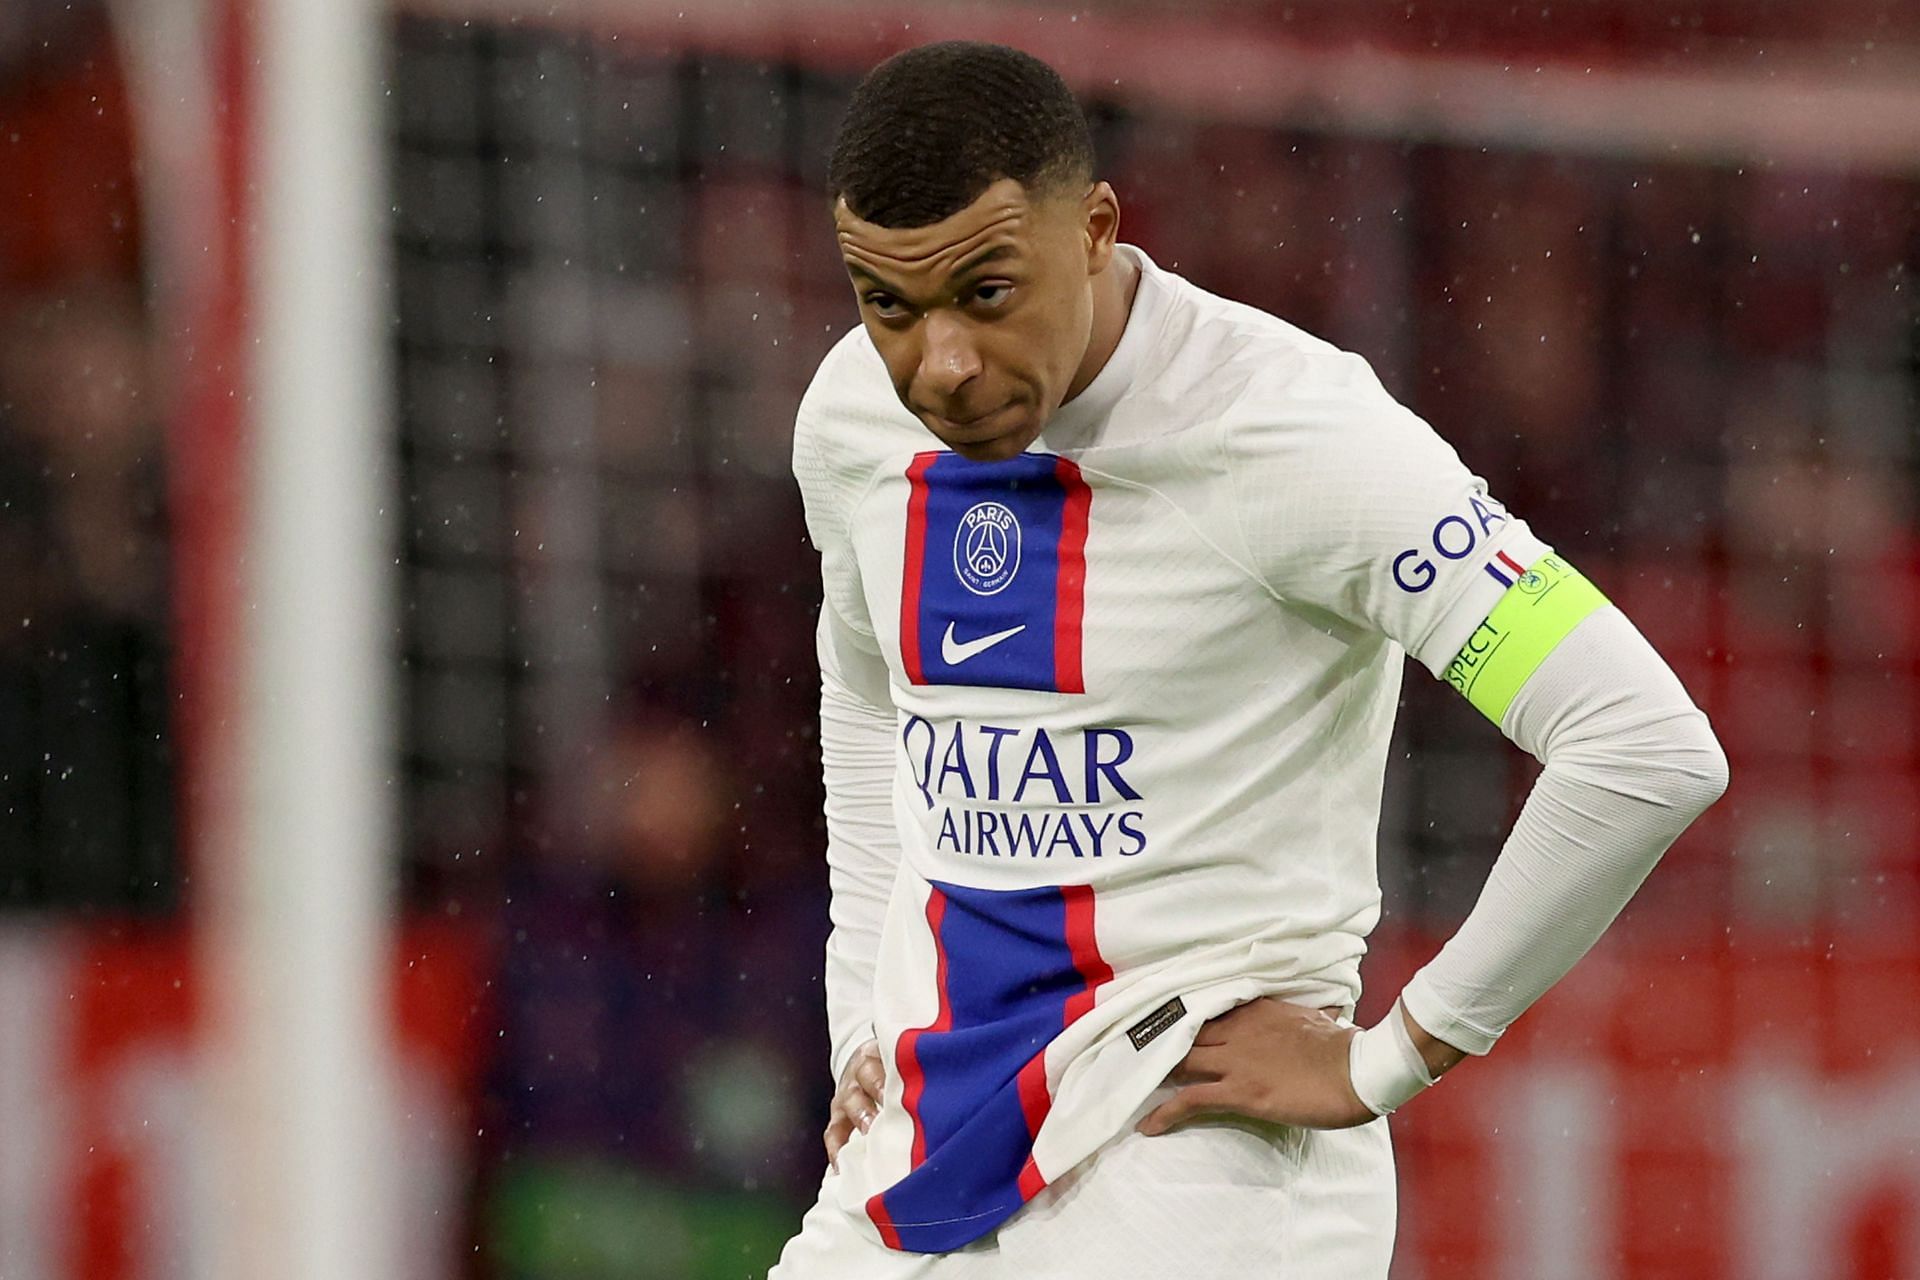 Kylian Mbappe slammed his club for overusing him in promotional video.